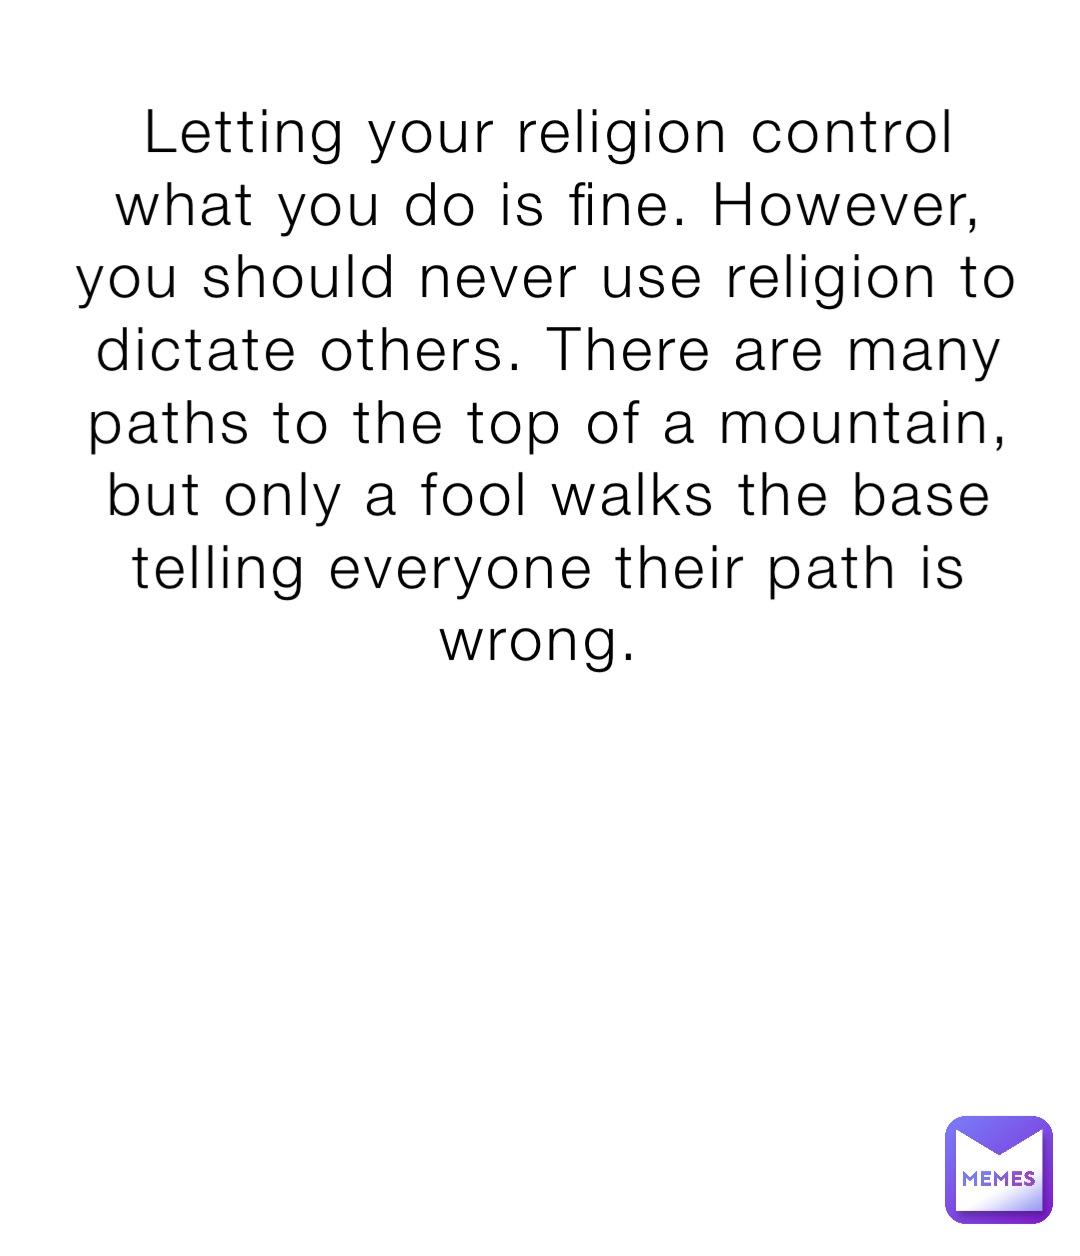 Letting your religion control what you do is fine. However, you should never use religion to dictate others. There are many paths to the top of a mountain, but only a fool walks the base telling everyone their path is wrong.